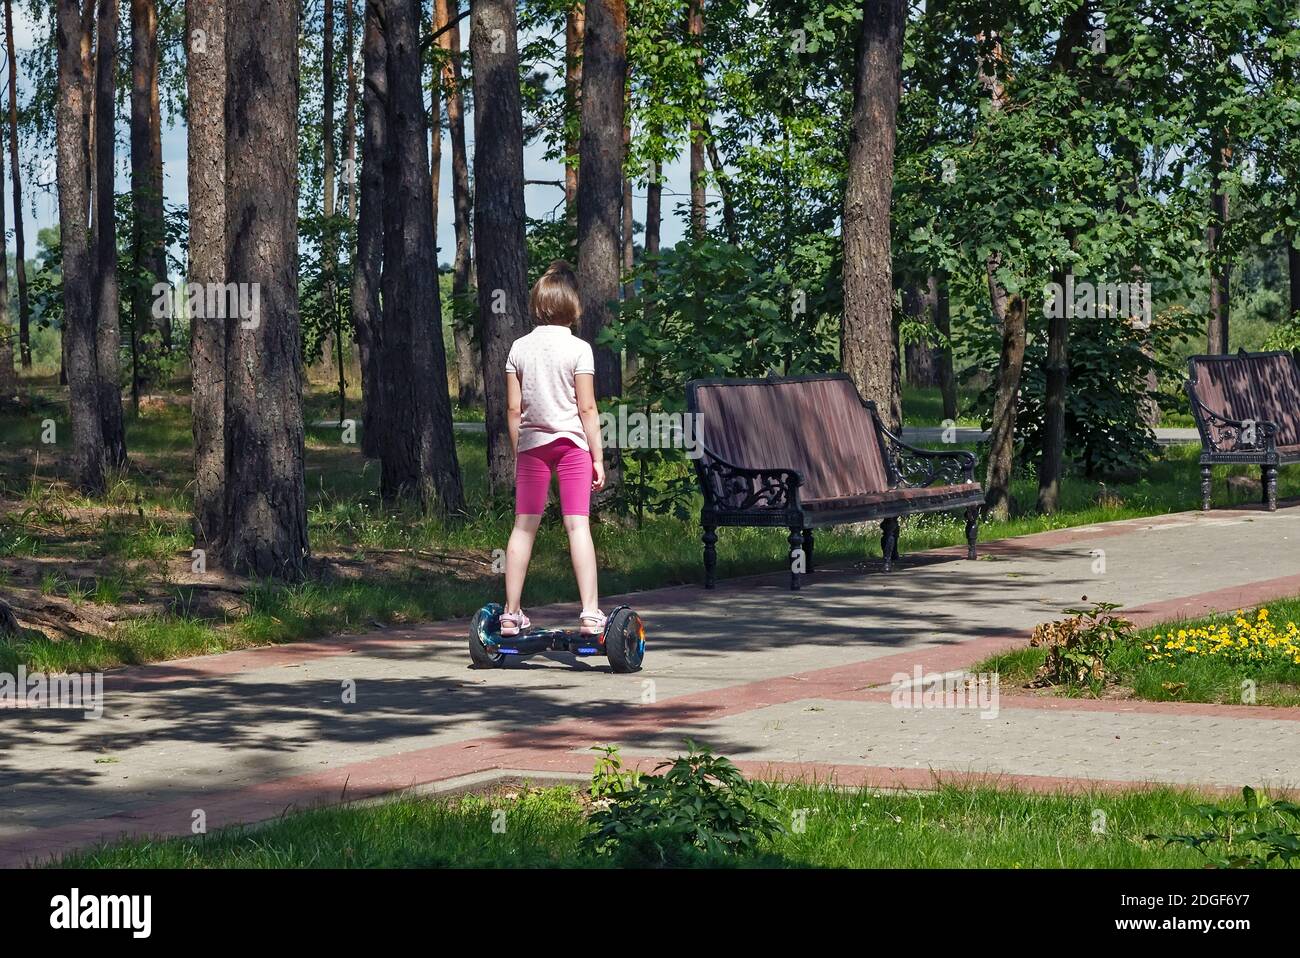 Girl riding in the Park on a self-balancing scooter Stock Photo